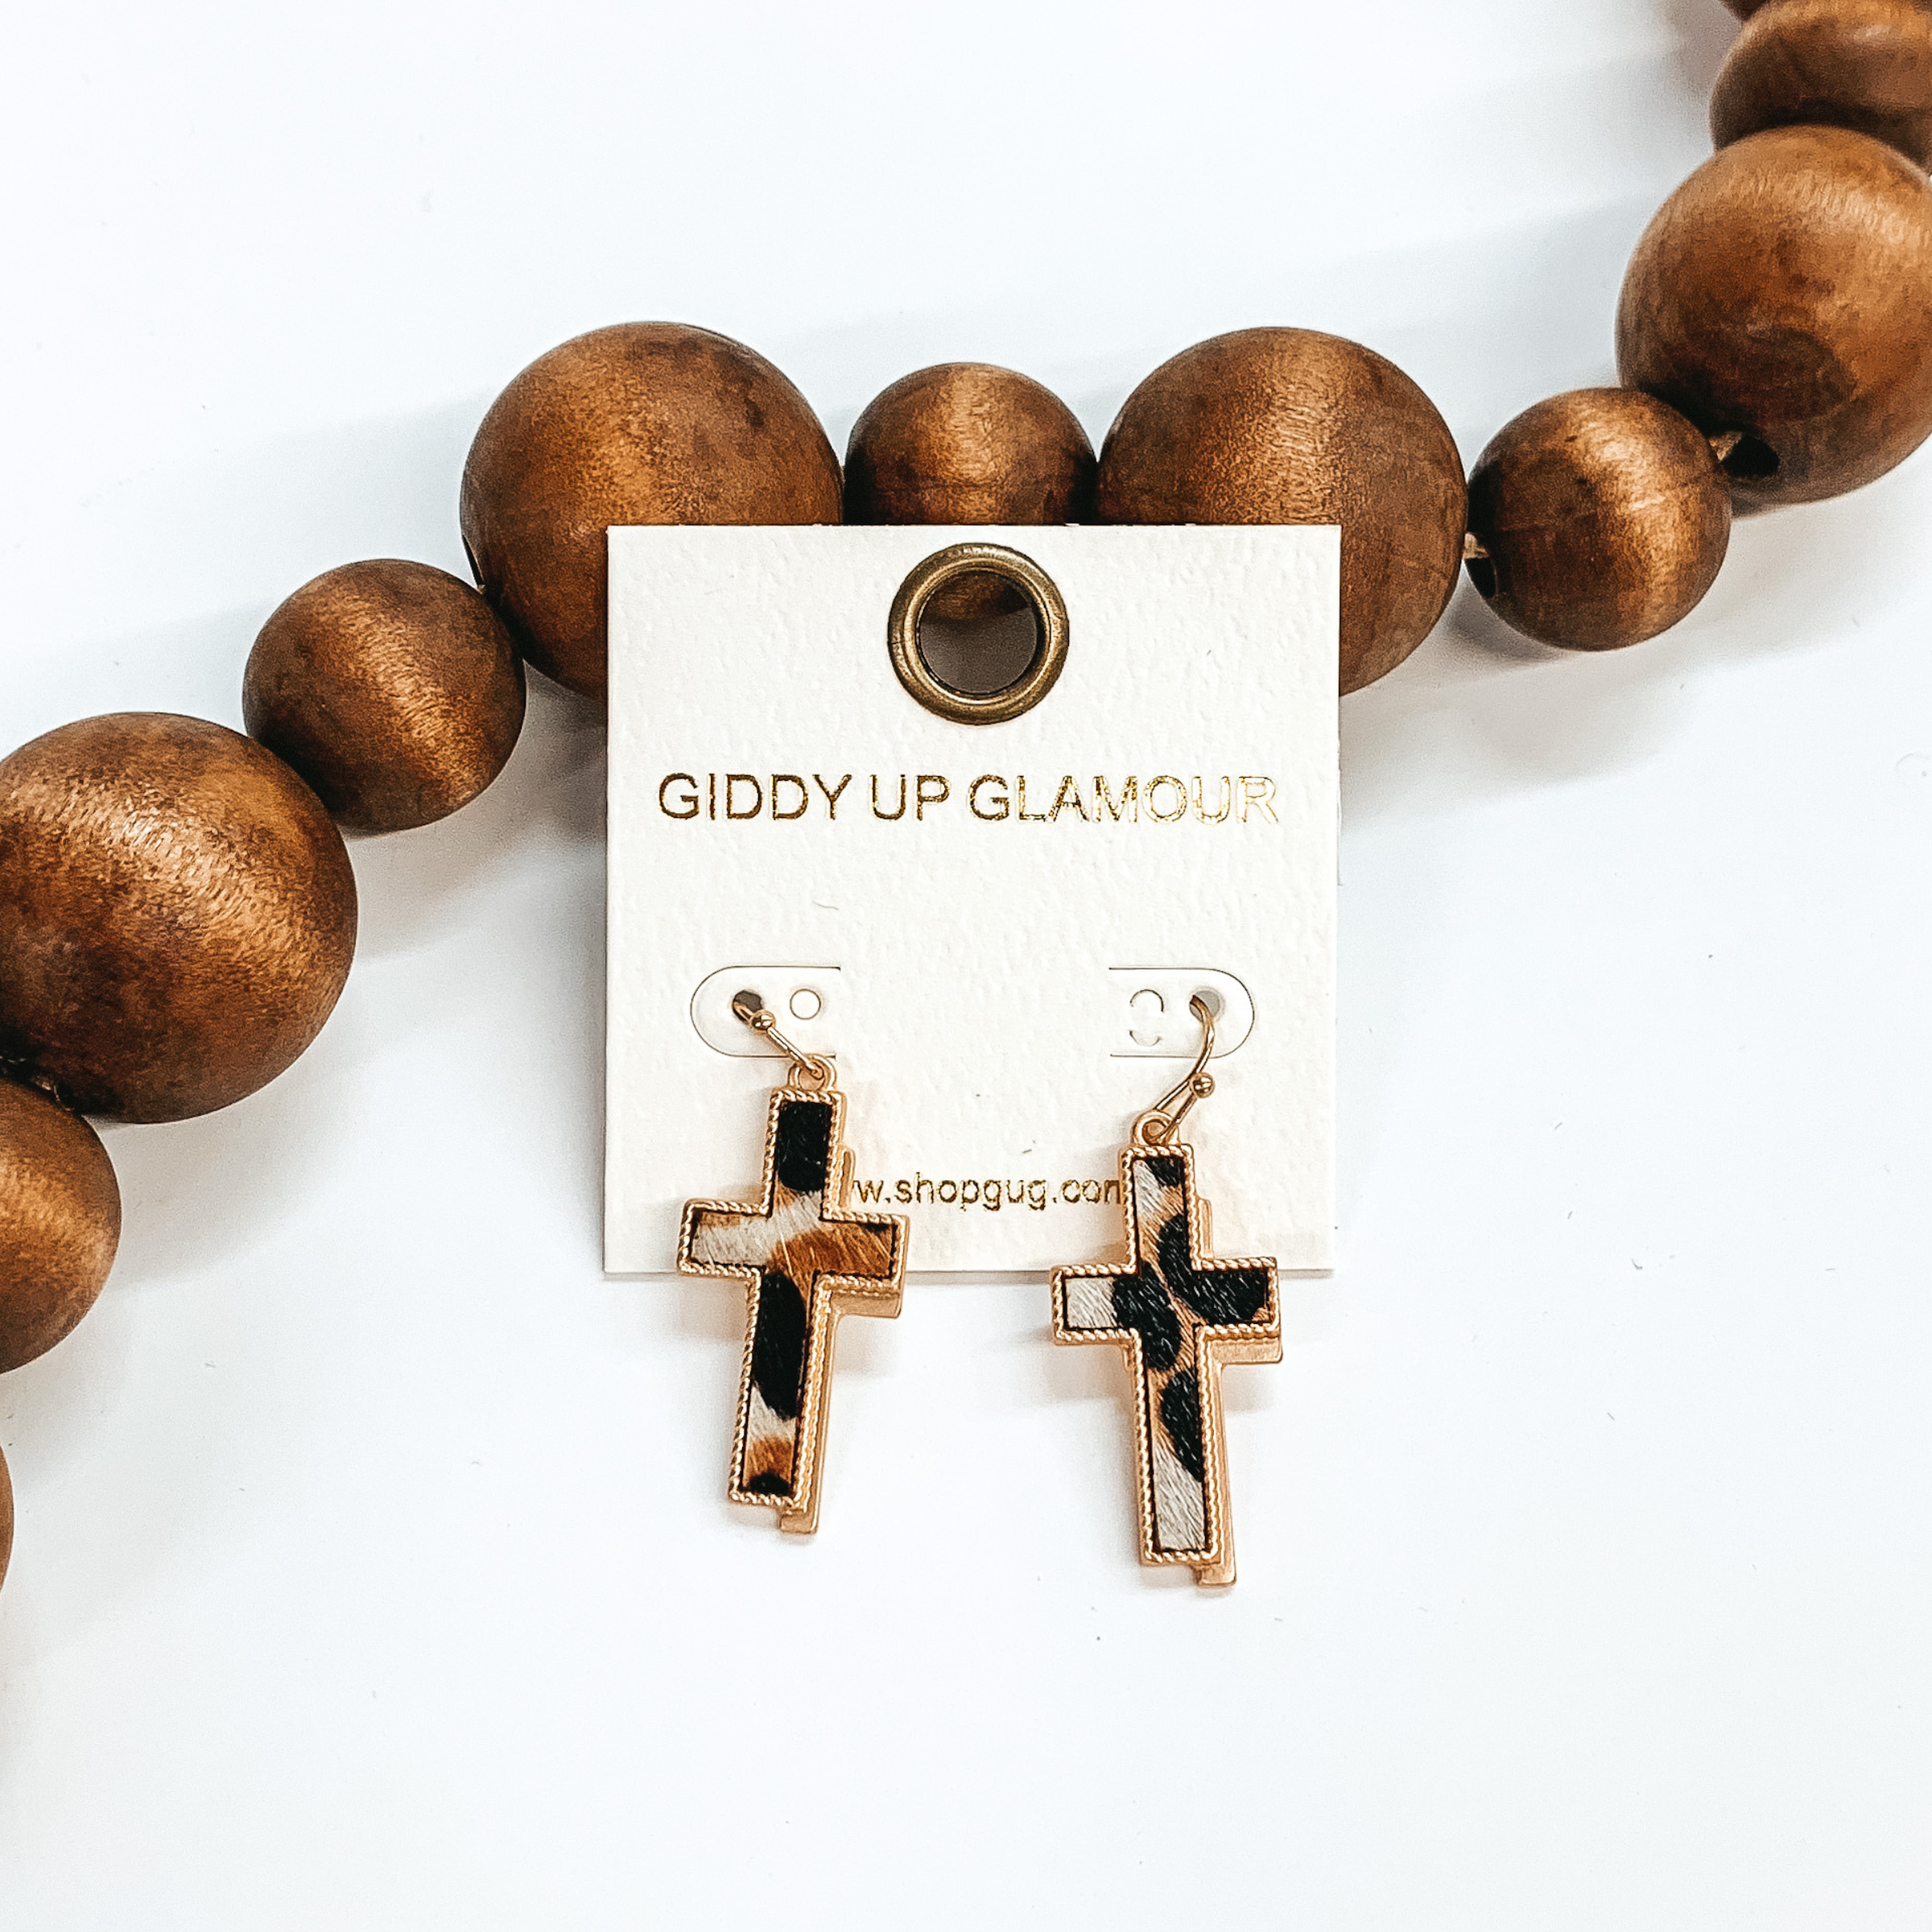 Gold cross earrings with a faux hide inlay in black, white, and brown print. They have a gold shadow as well. These earrings are taken leaning up  against dark brown beads and white background.